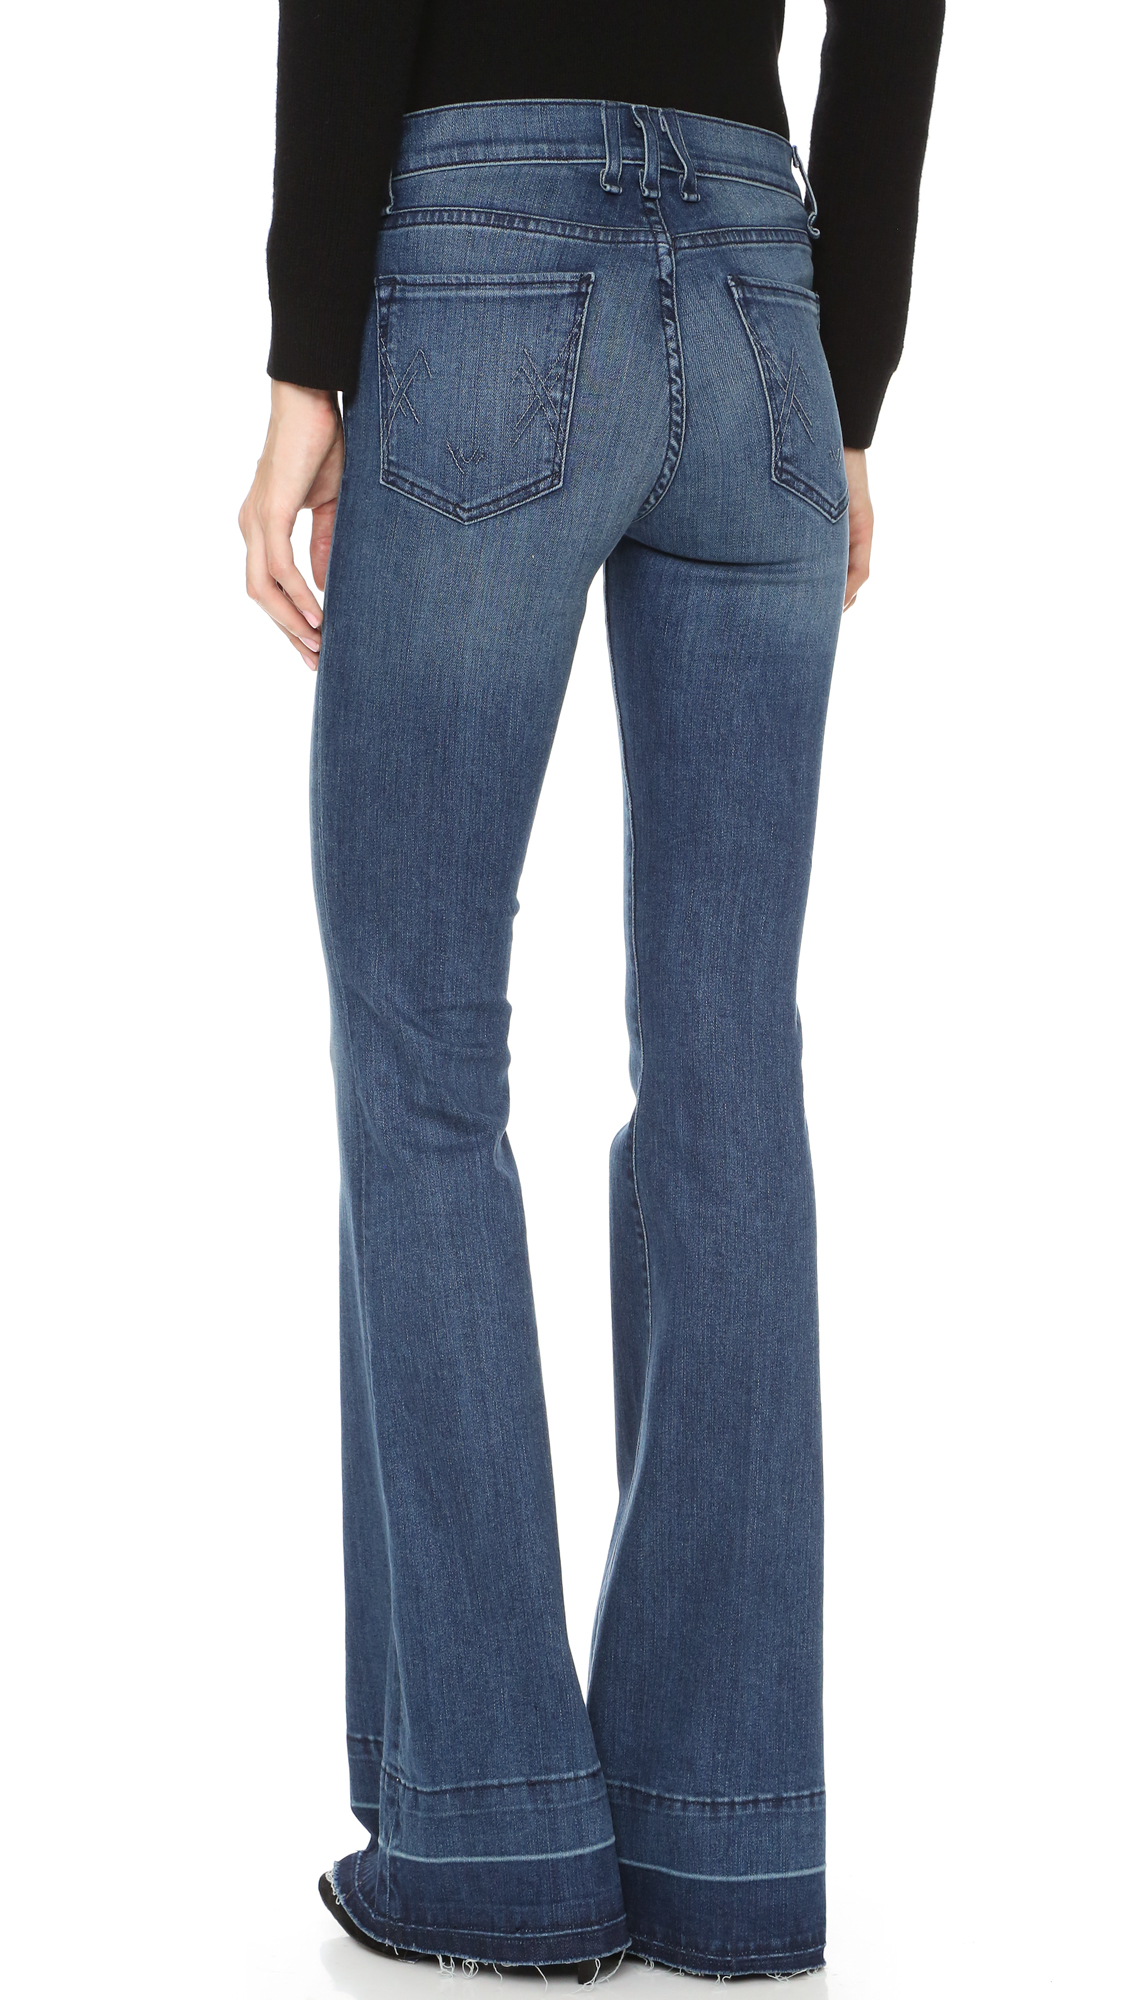 Lyst - Mcguire Denim Majorelle Flare Jeans in Blue